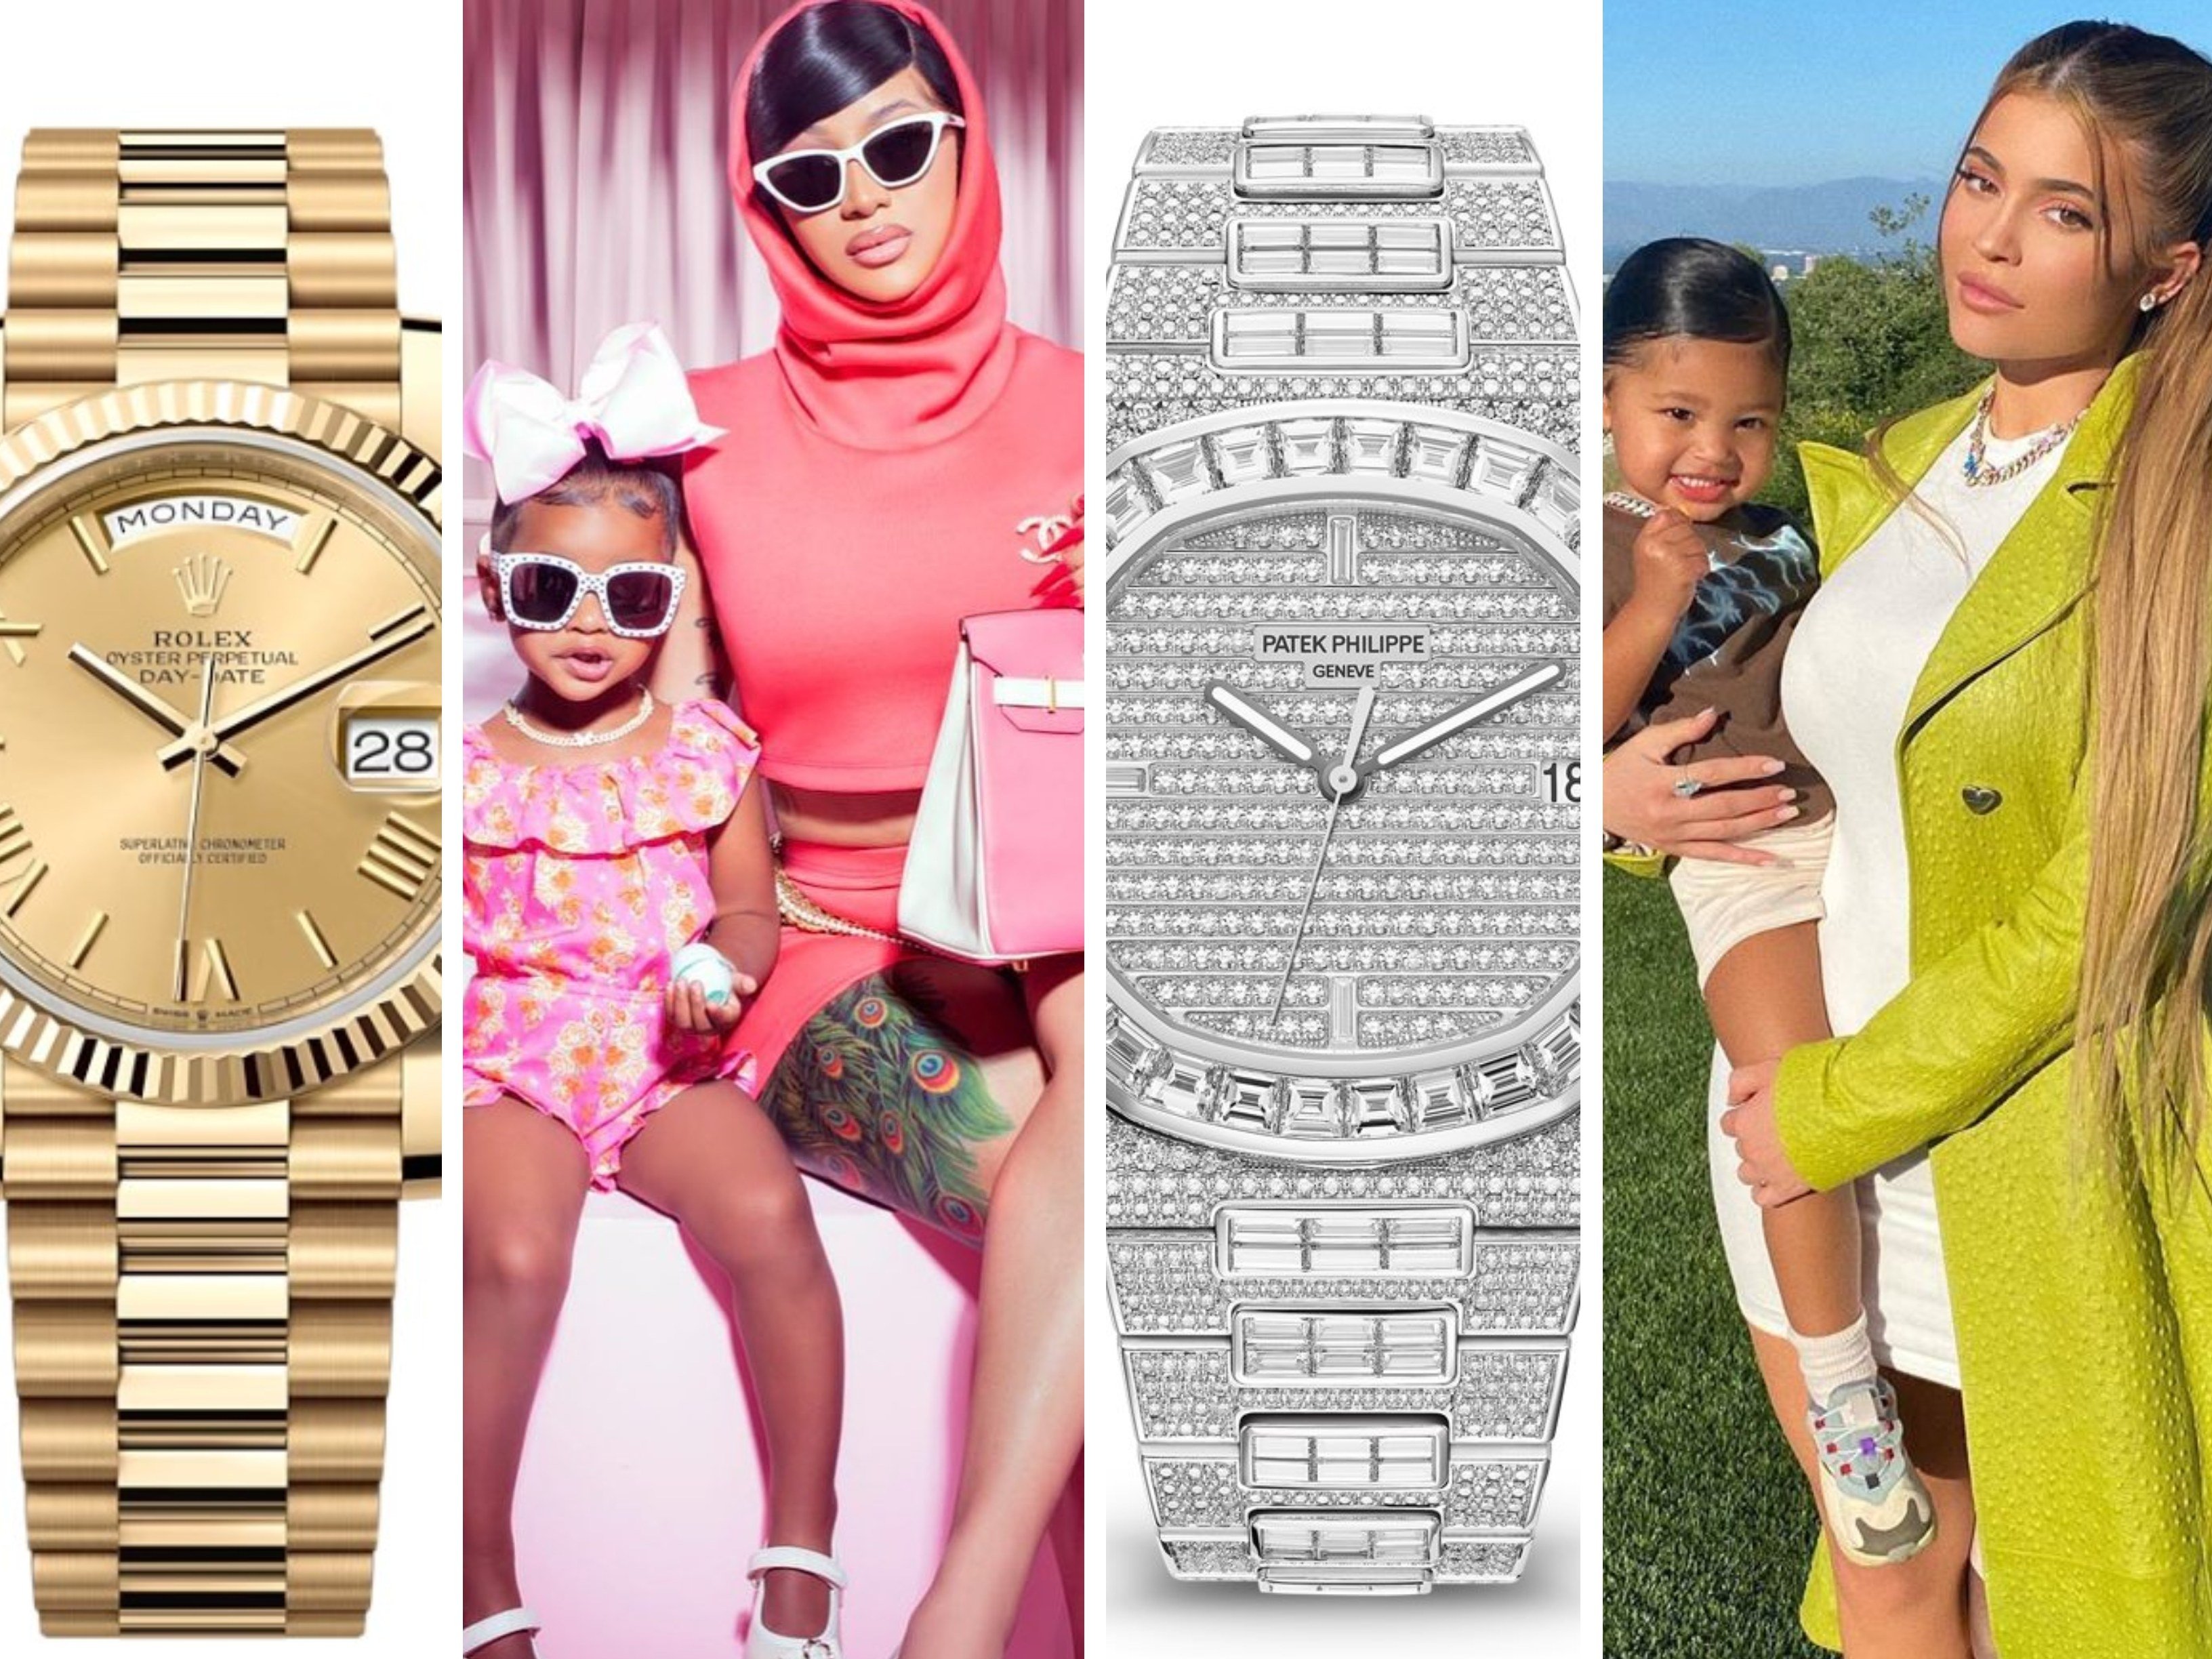 Both Cardi B and daughter Kulture, and Kylie Jenner and daughter Stormi own luxury watches. Photos: Rolex; Patek Philippe; @iamcardib, @kyliejenner/Instagram